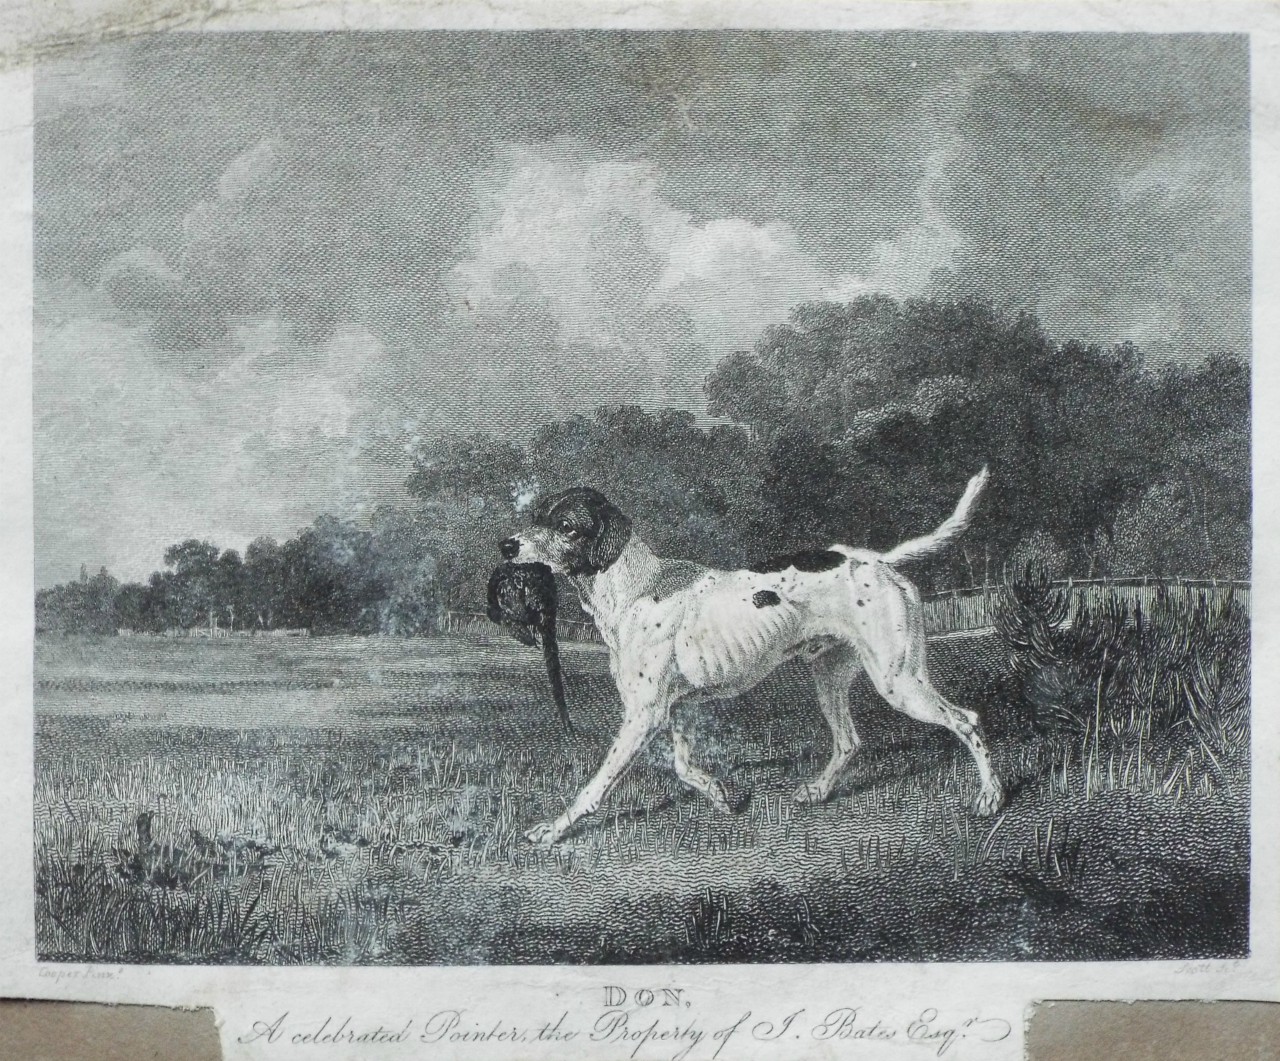 Print - Don. A celebrated Pointer, the Property of J. Bates Esqr. - 